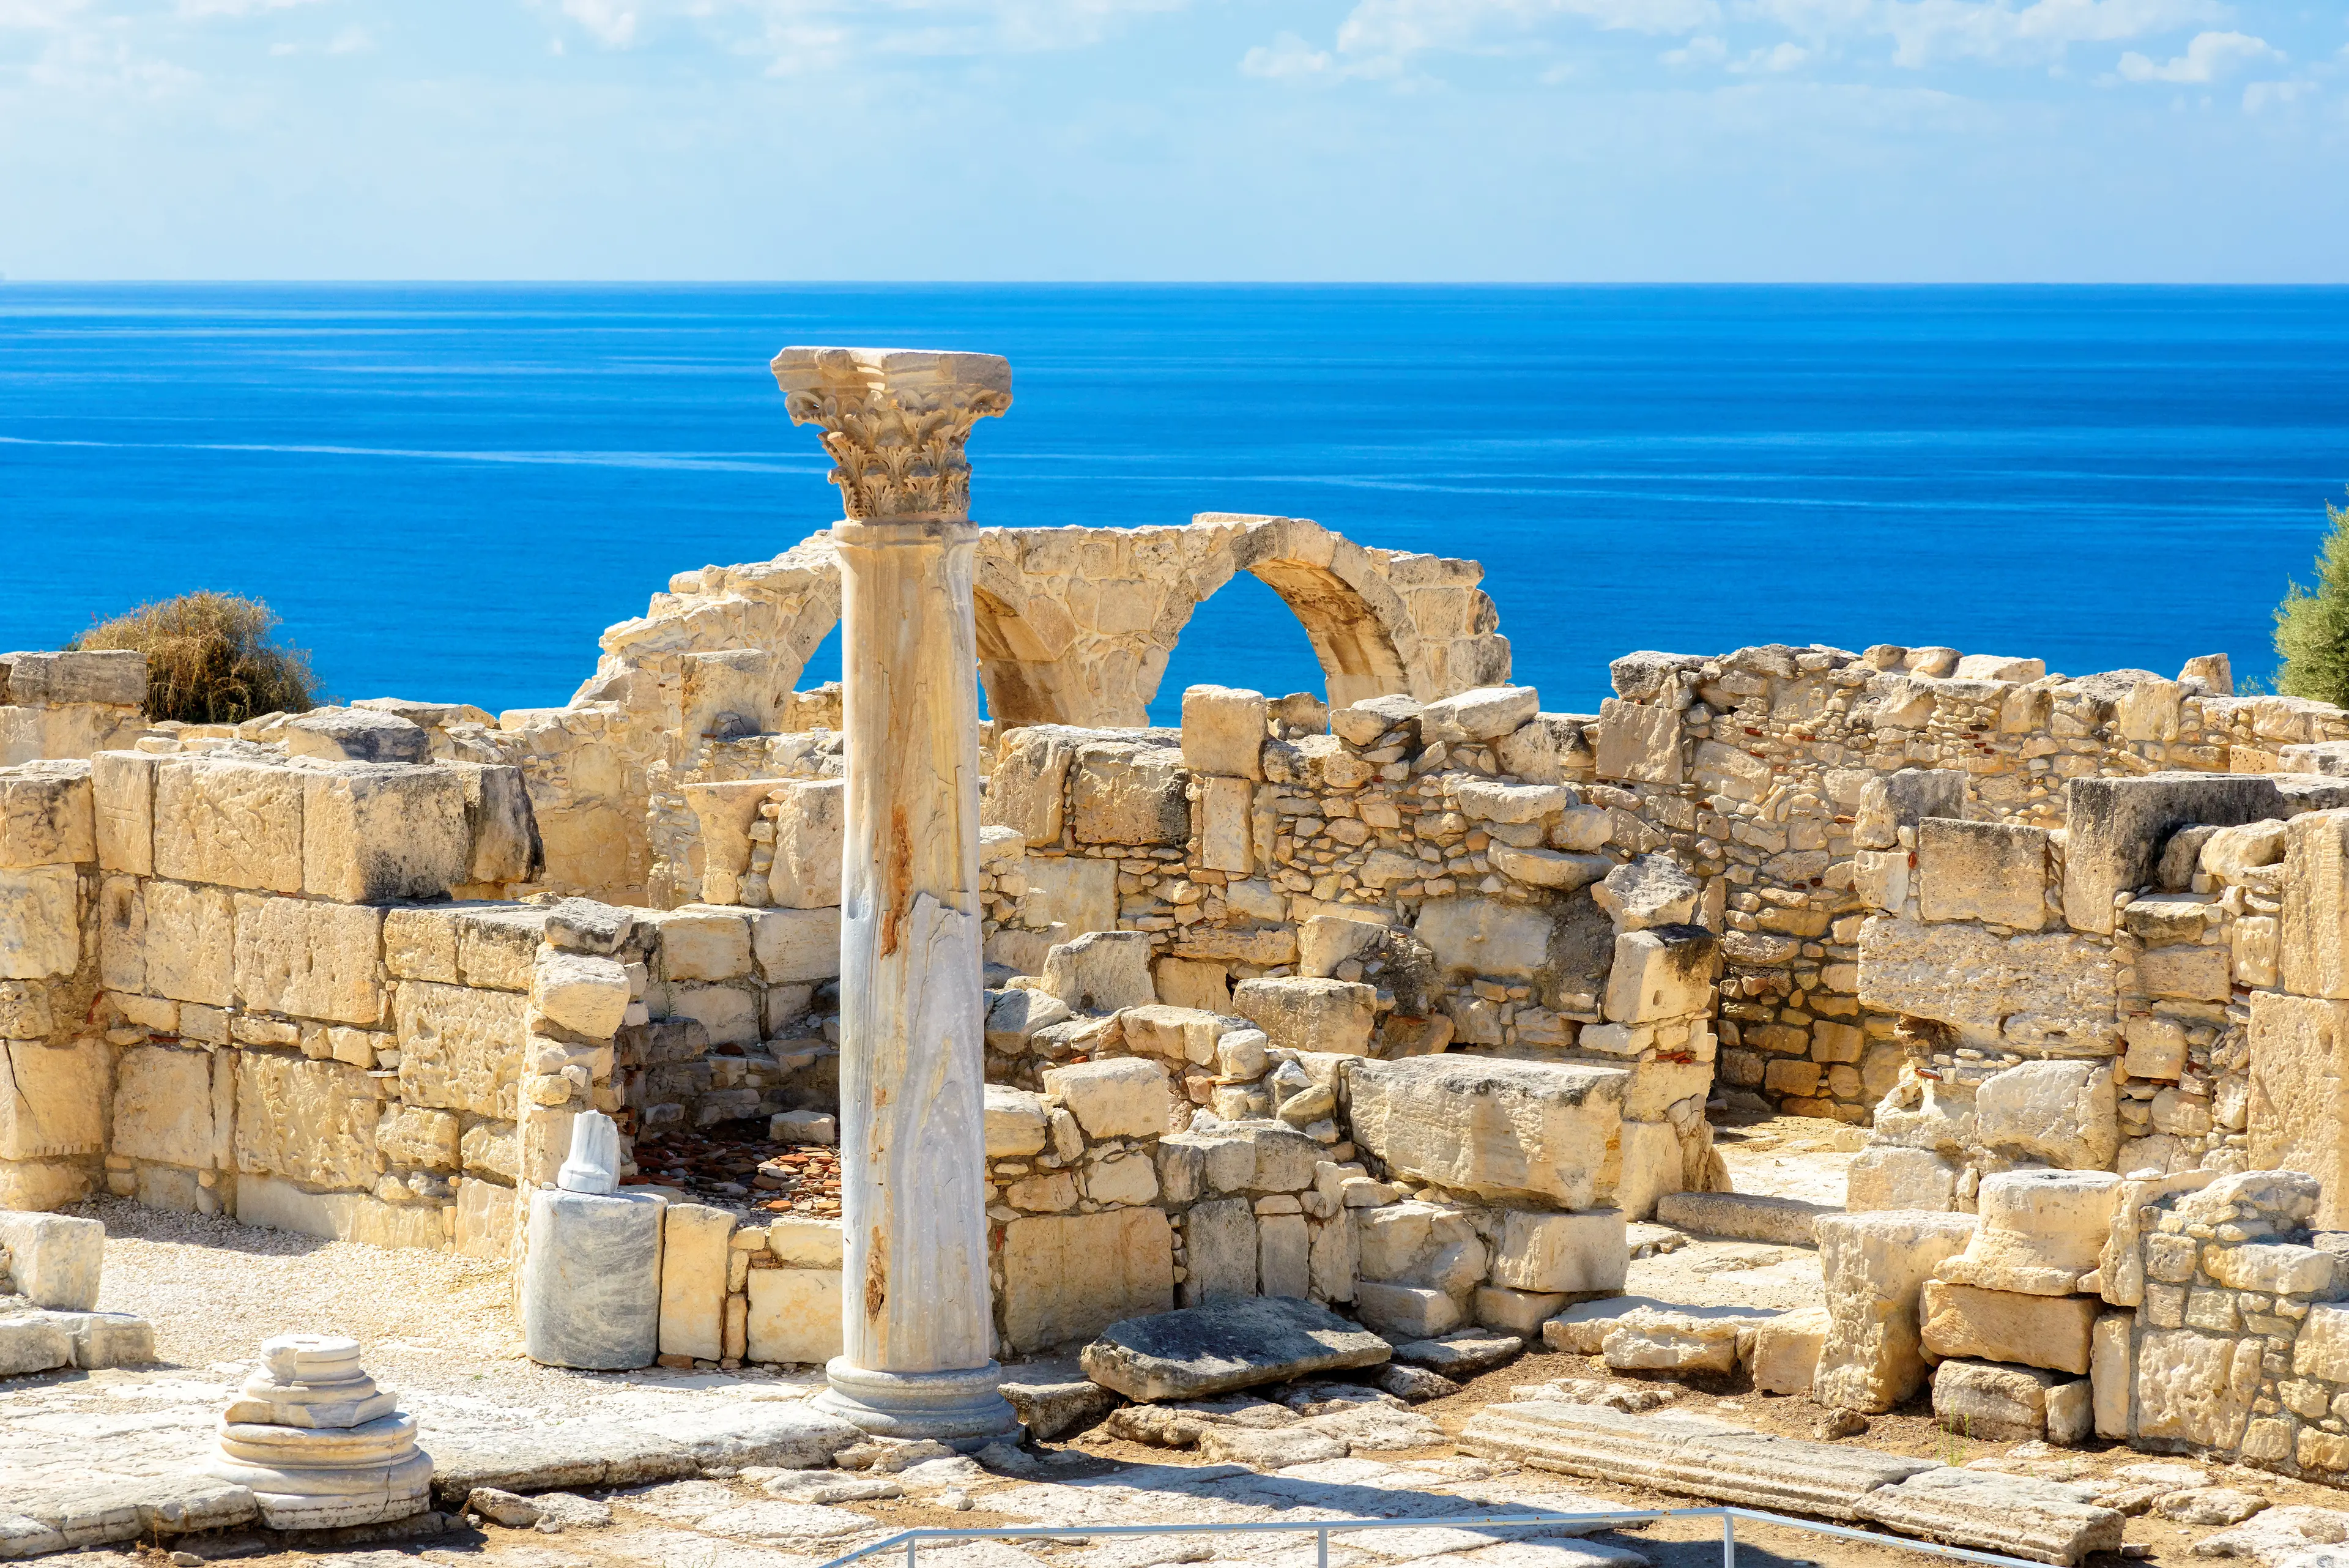 6-Day Cyprus Adventure: Nightlife, Outdoors & Romance for Couples